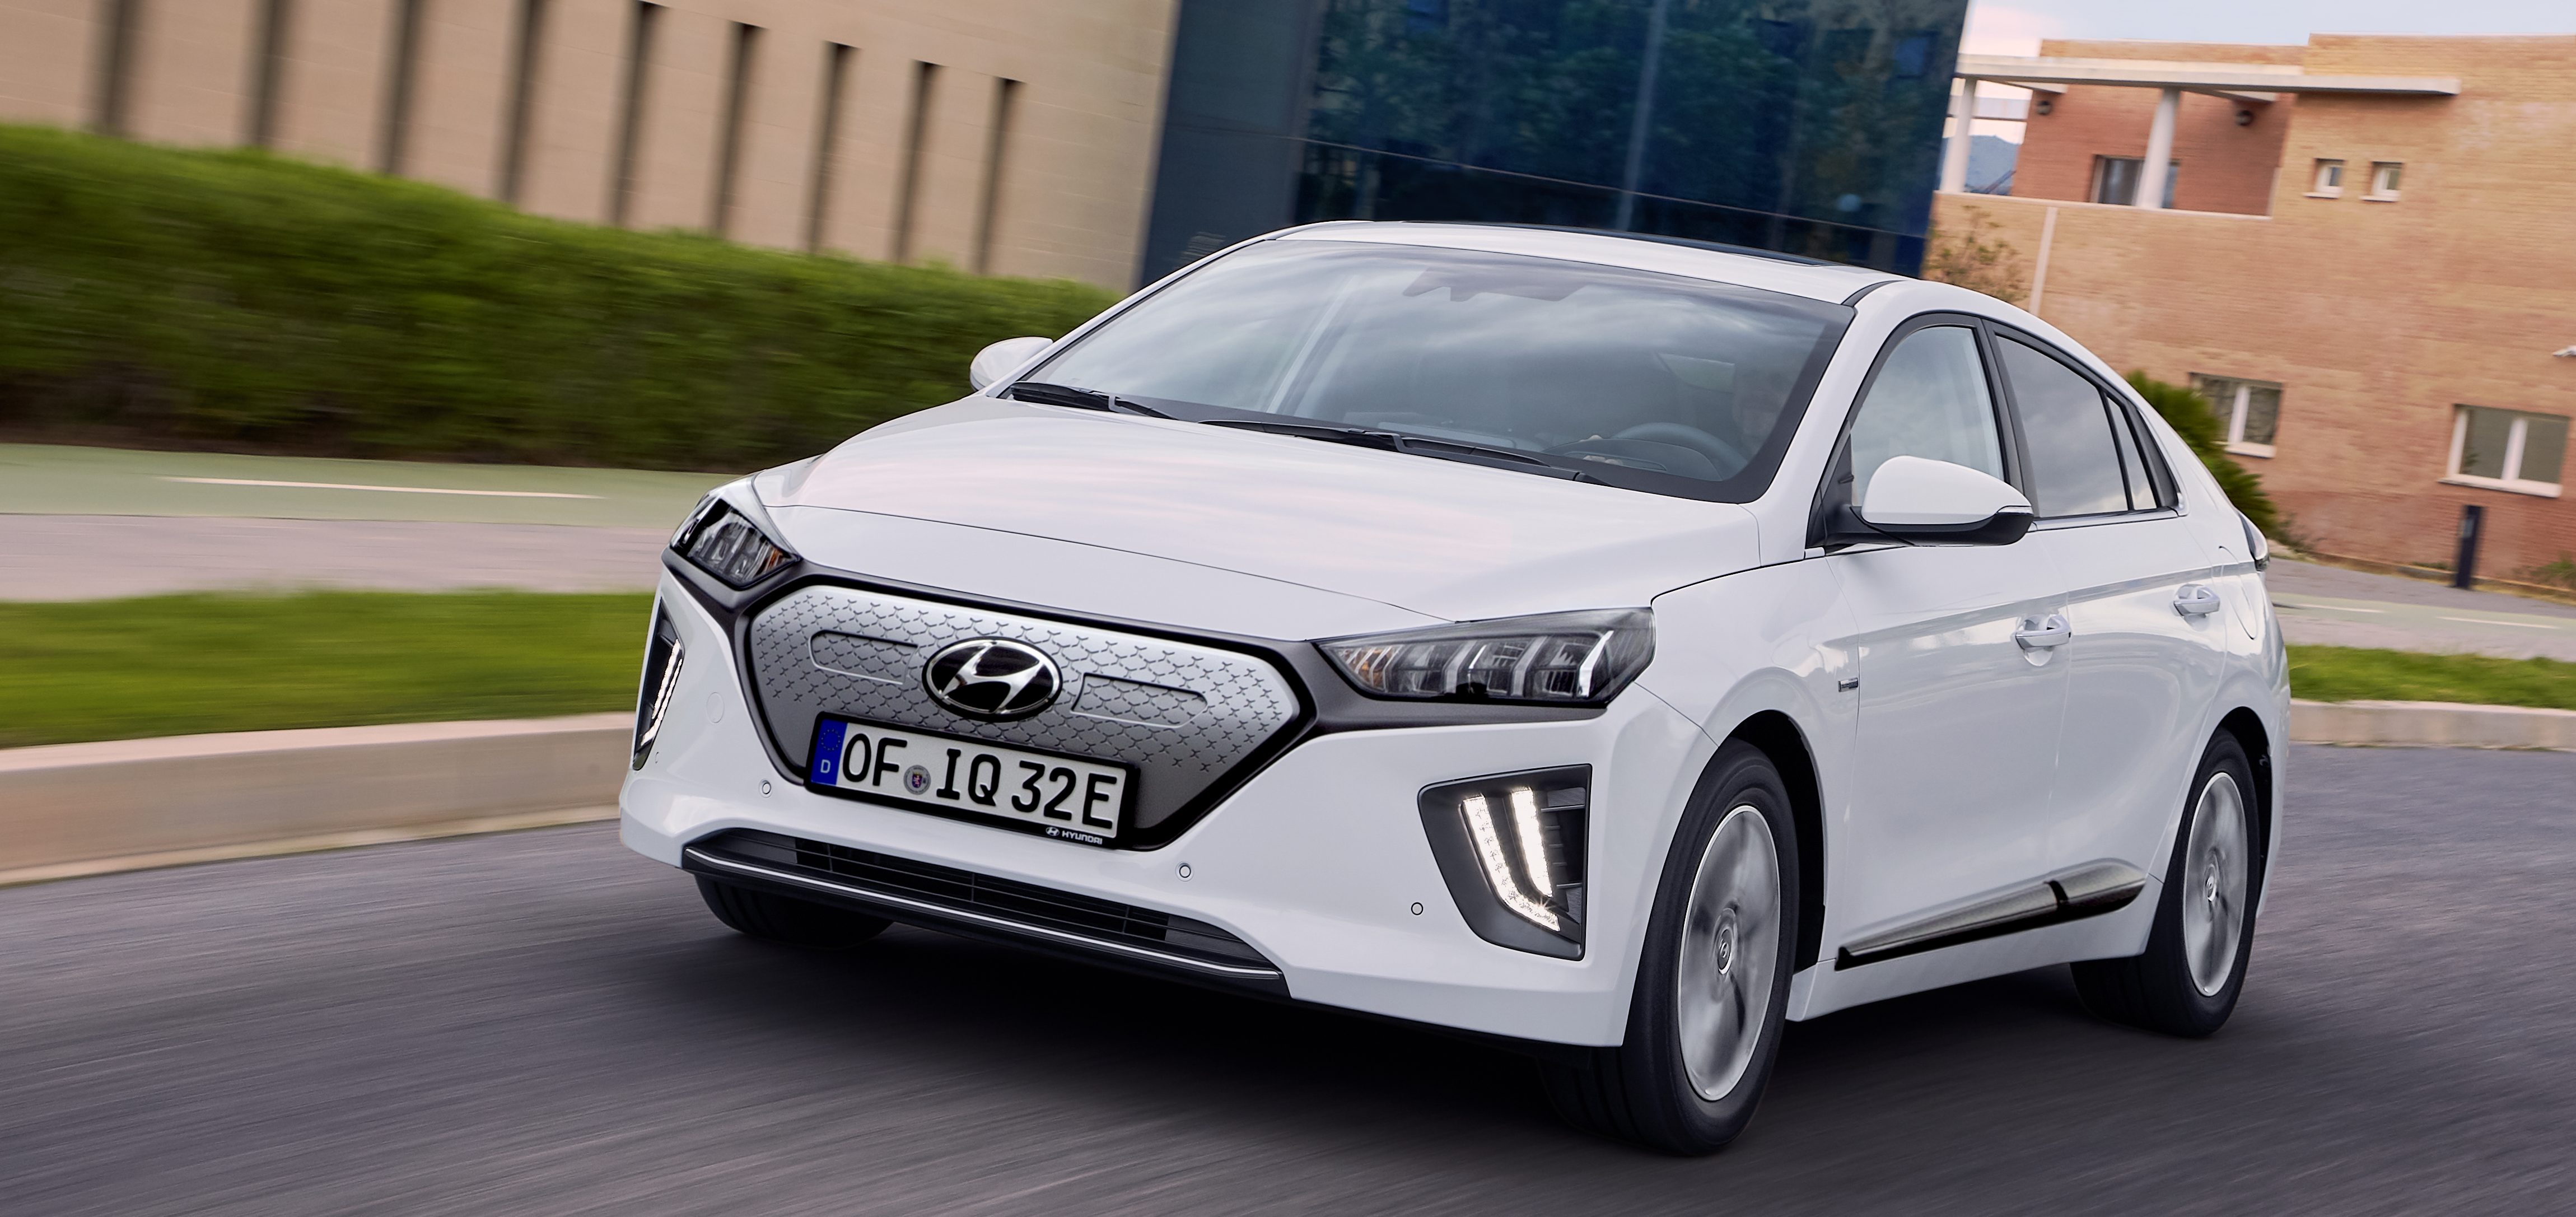 herten Redding ontsmettingsmiddel Hyundai upgrades IONIQ Electric with significantly bigger battery and  design refresh | Electrek